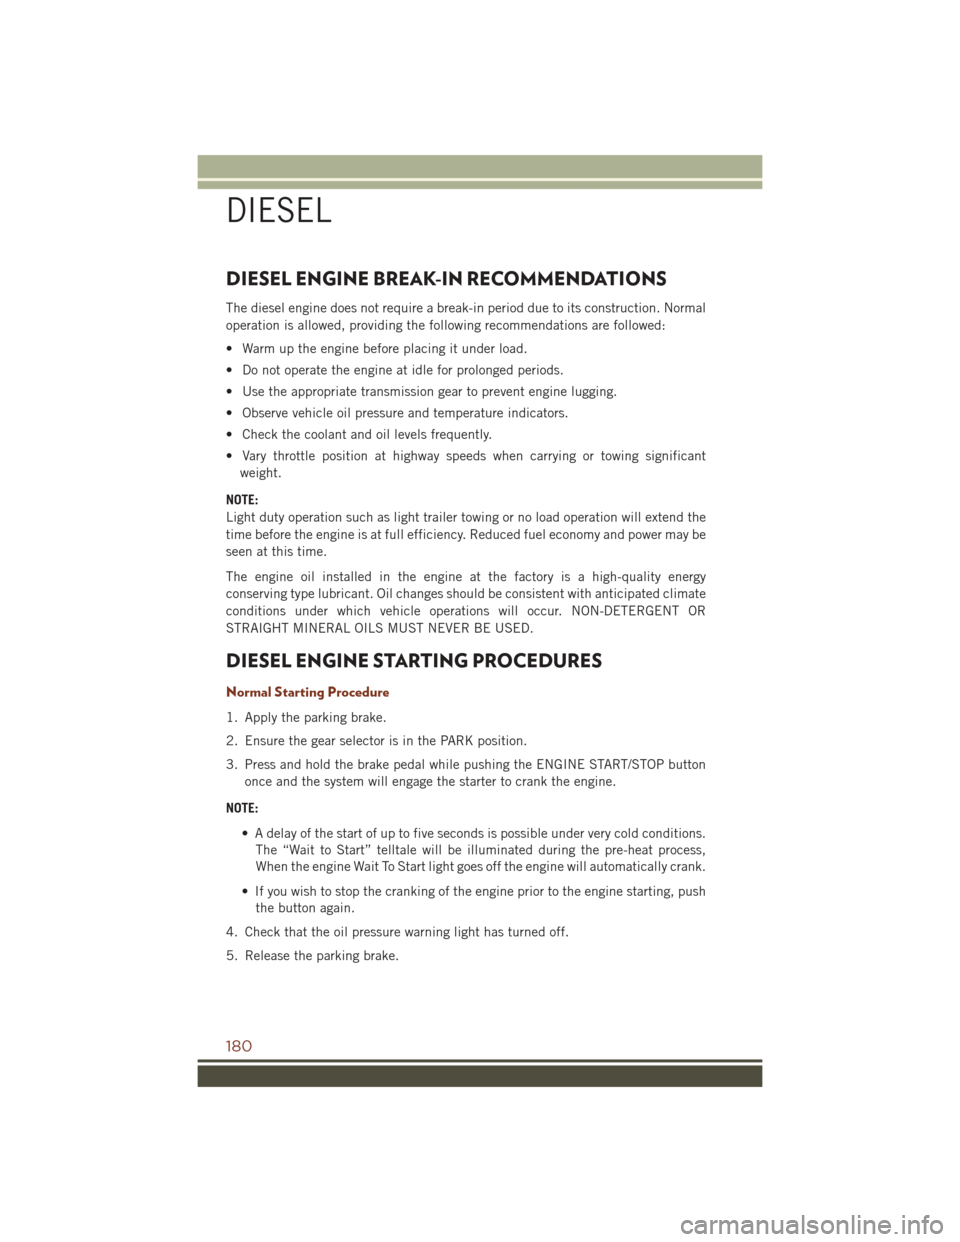 JEEP GRAND CHEROKEE 2016 WK2 / 4.G User Guide DIESEL ENGINE BREAK-IN RECOMMENDATIONS
The diesel engine does not require a break-in period due to its construction. Normal
operation is allowed, providing the following recommendations are followed:
